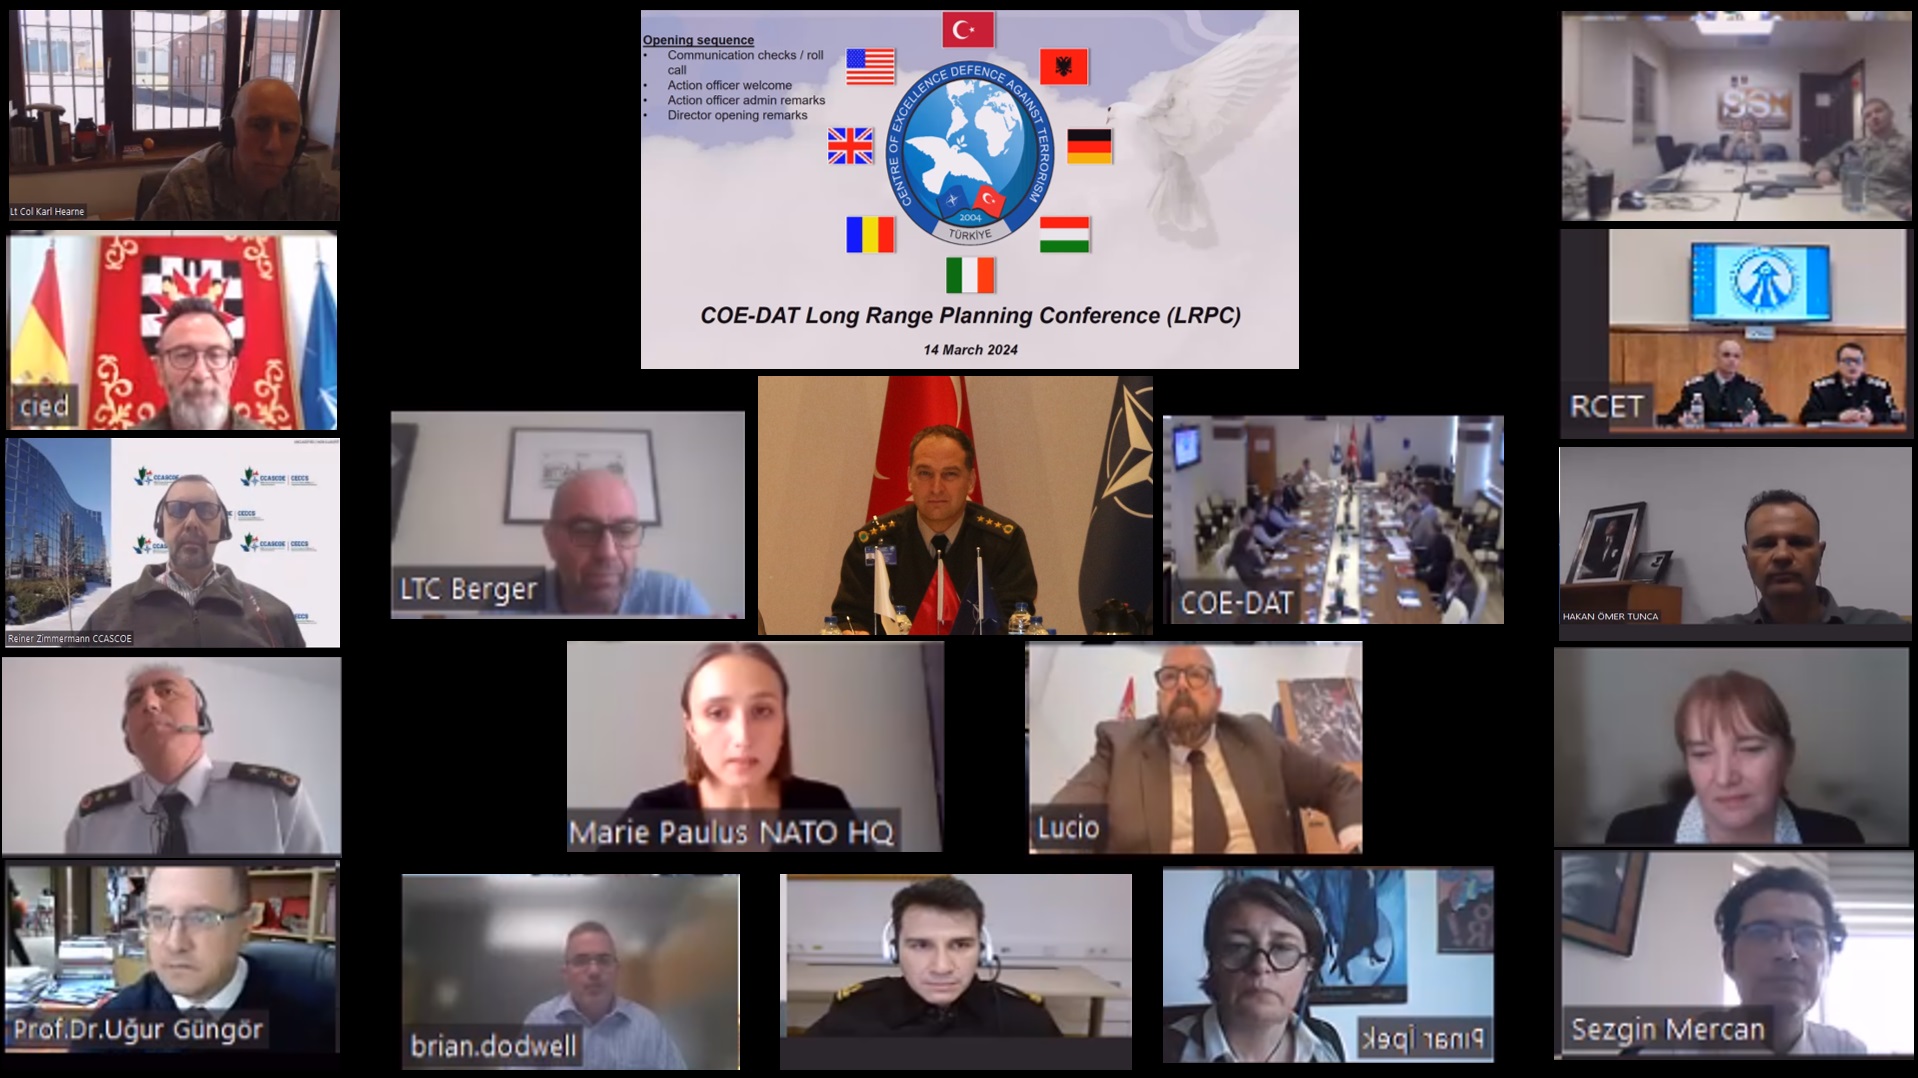 COE-DAT Long Range Planning Online Conference was held on 14 March 2024.